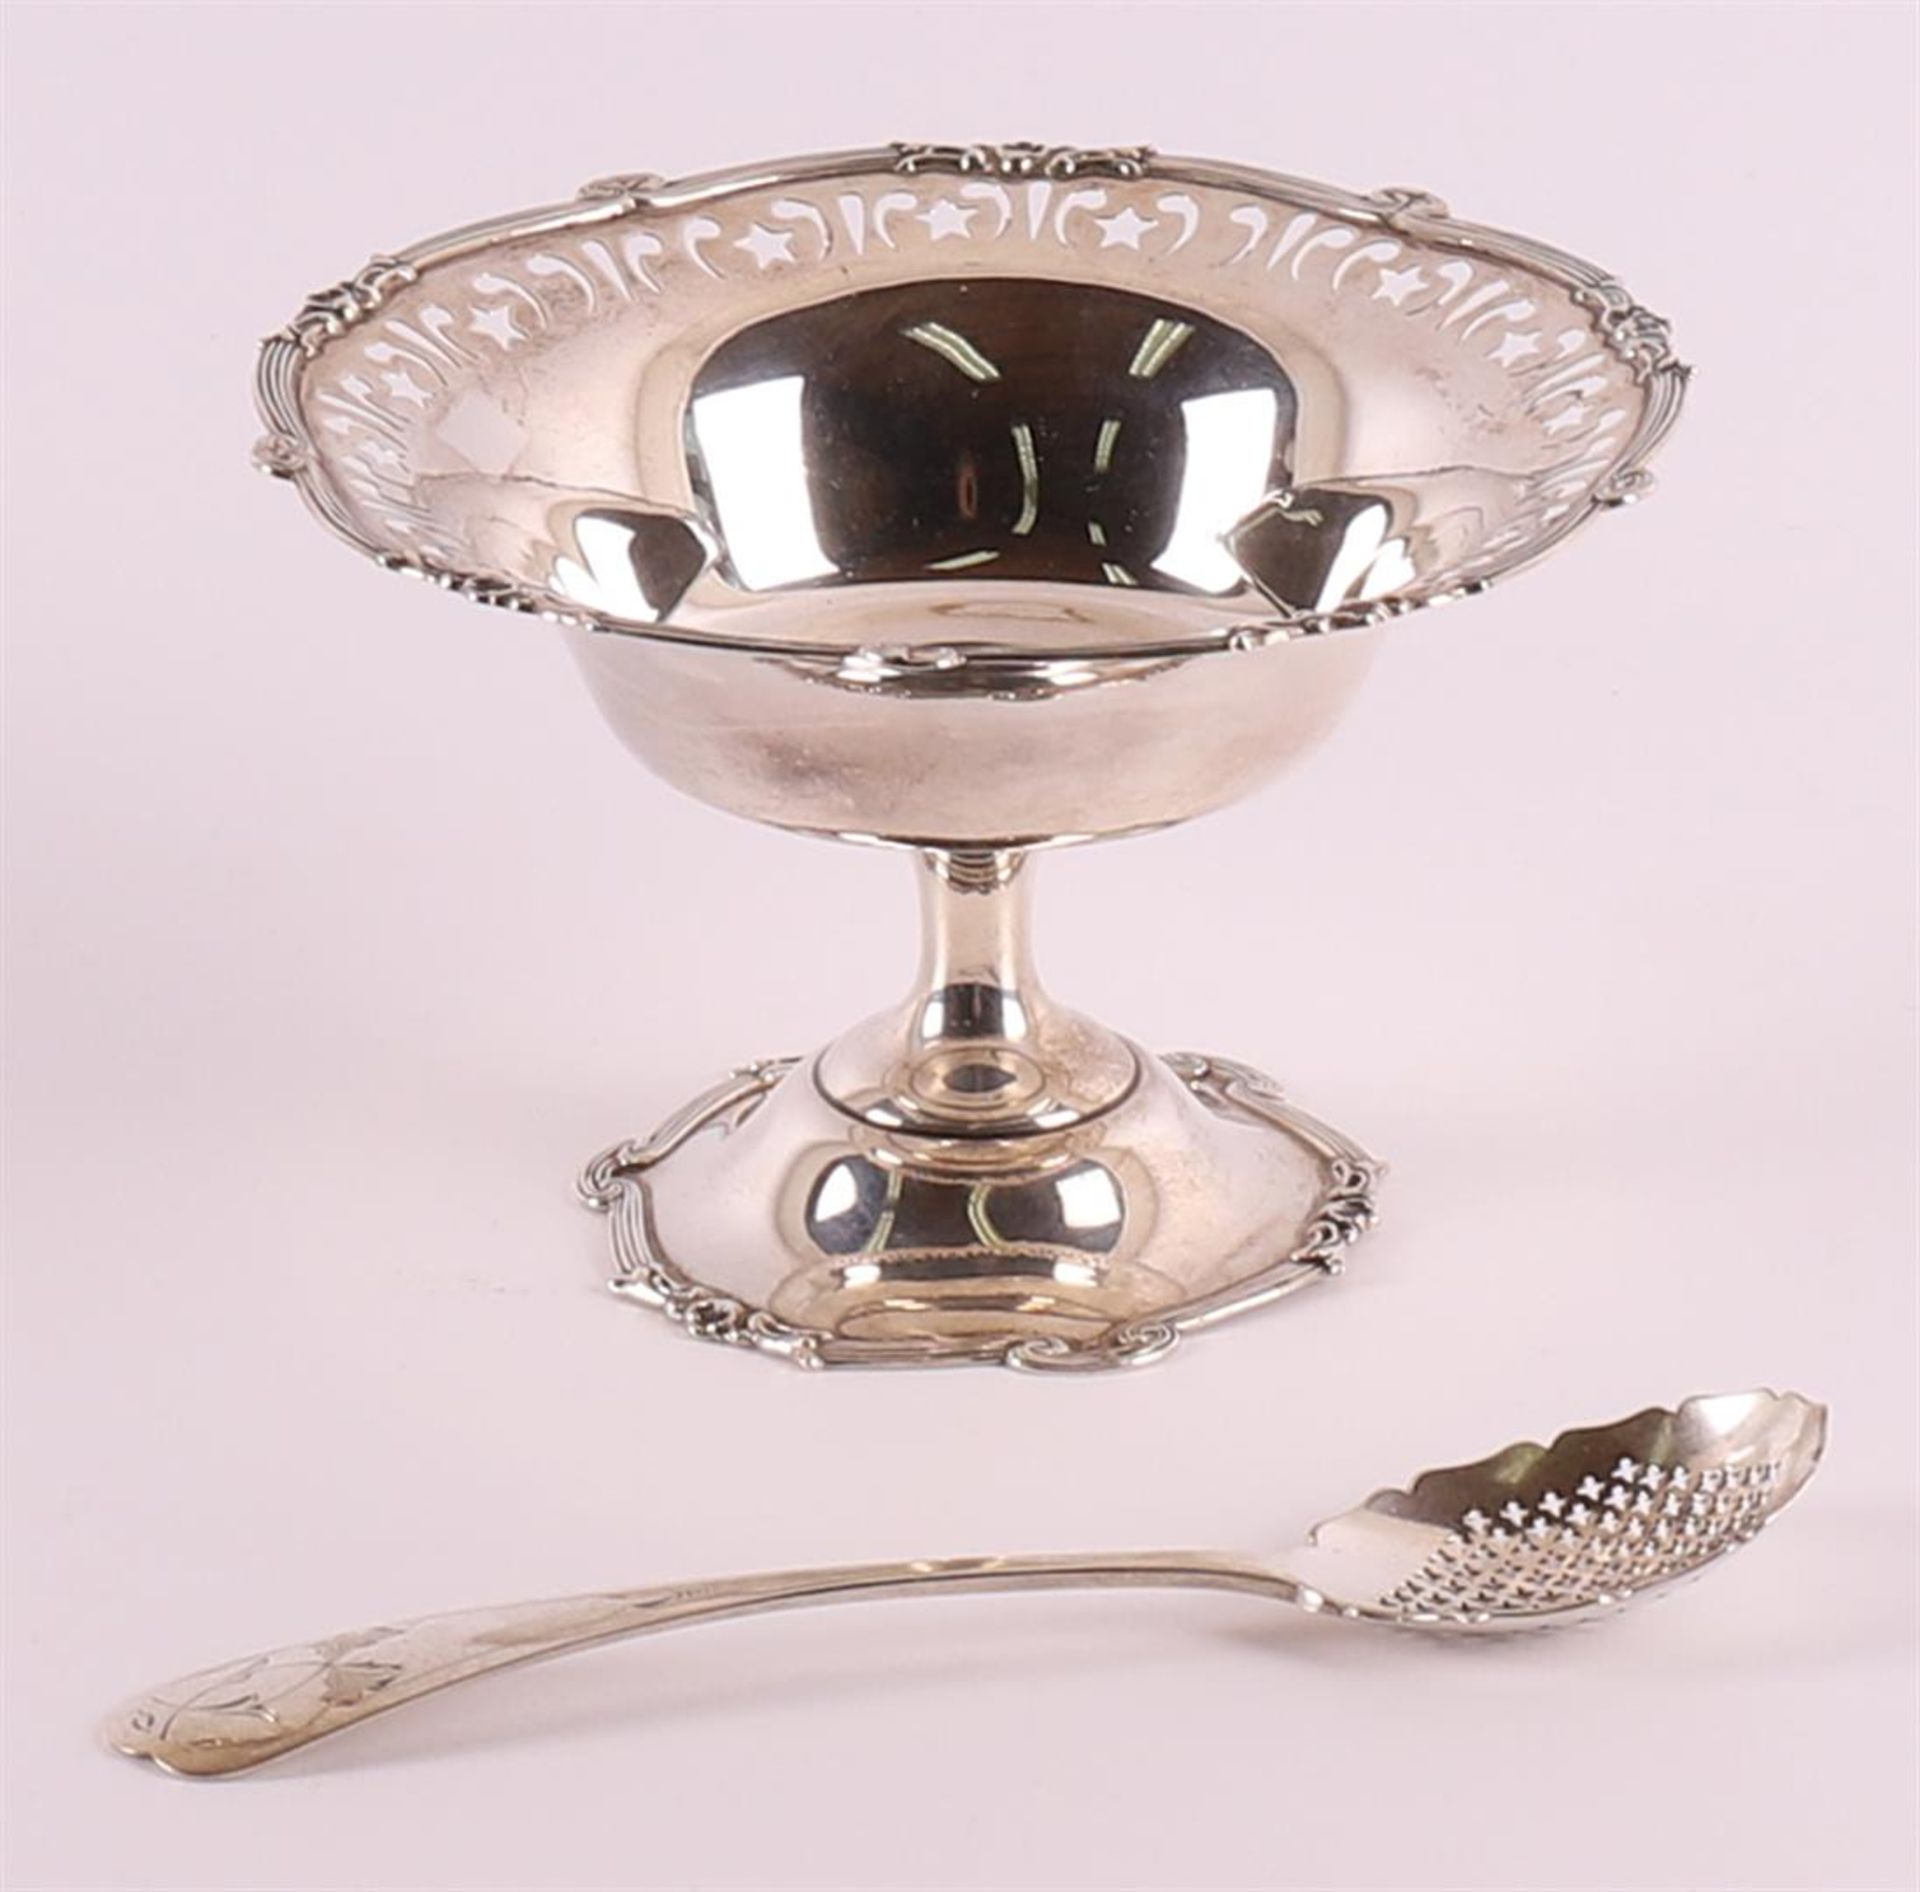 A Sterling silver tazza with ajourned and fillet edge, England, early 20th century, h 9 x Ø 15 cm.